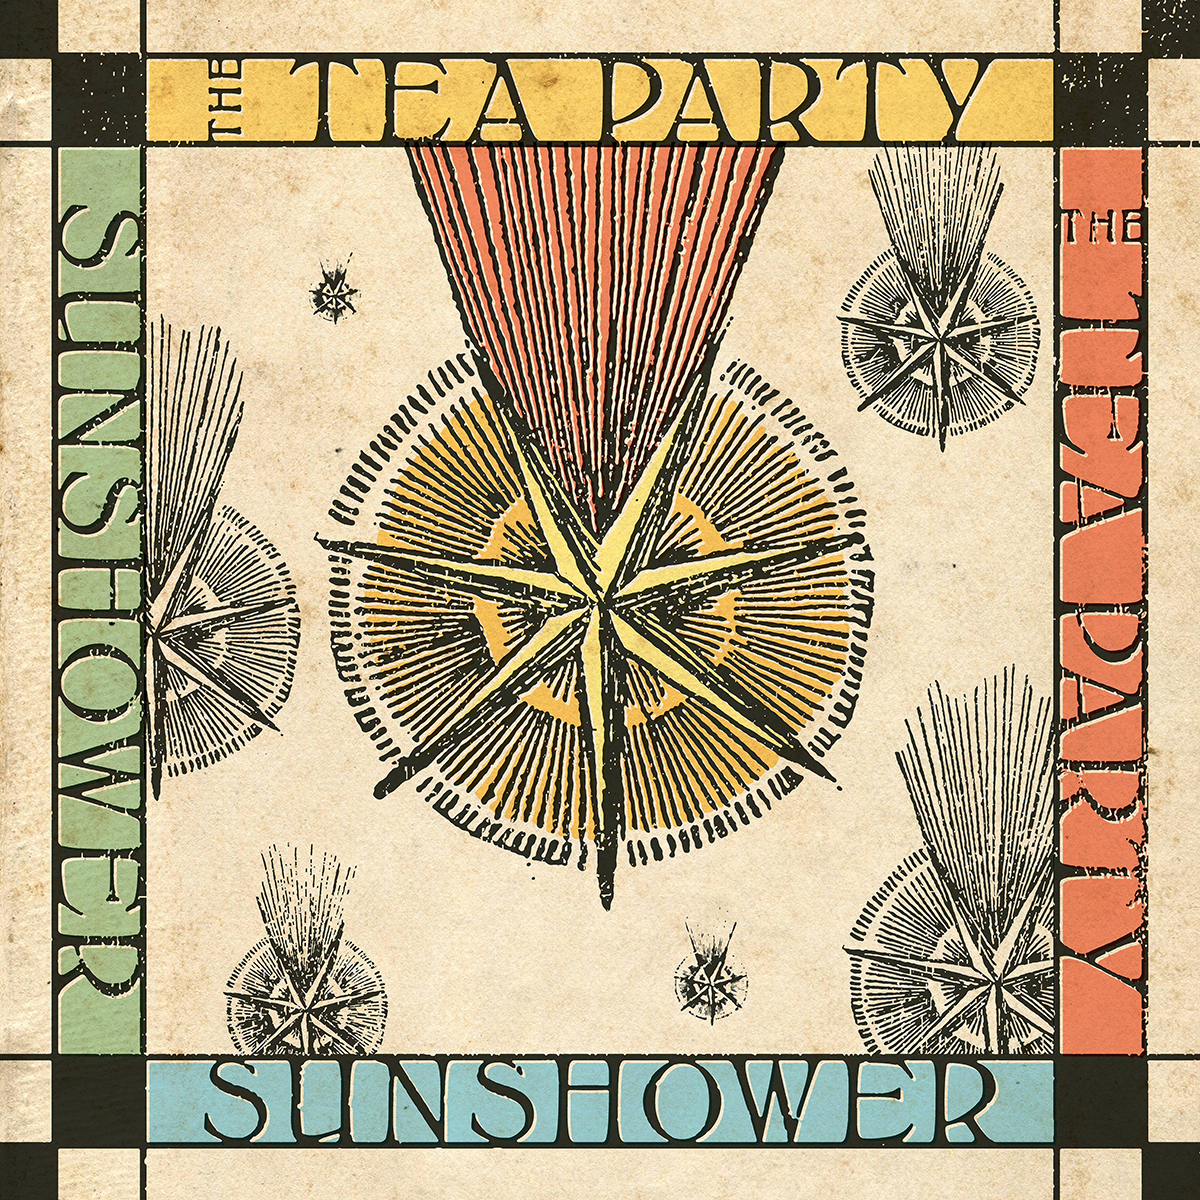 The Tea Party Sunshower - New EP Release